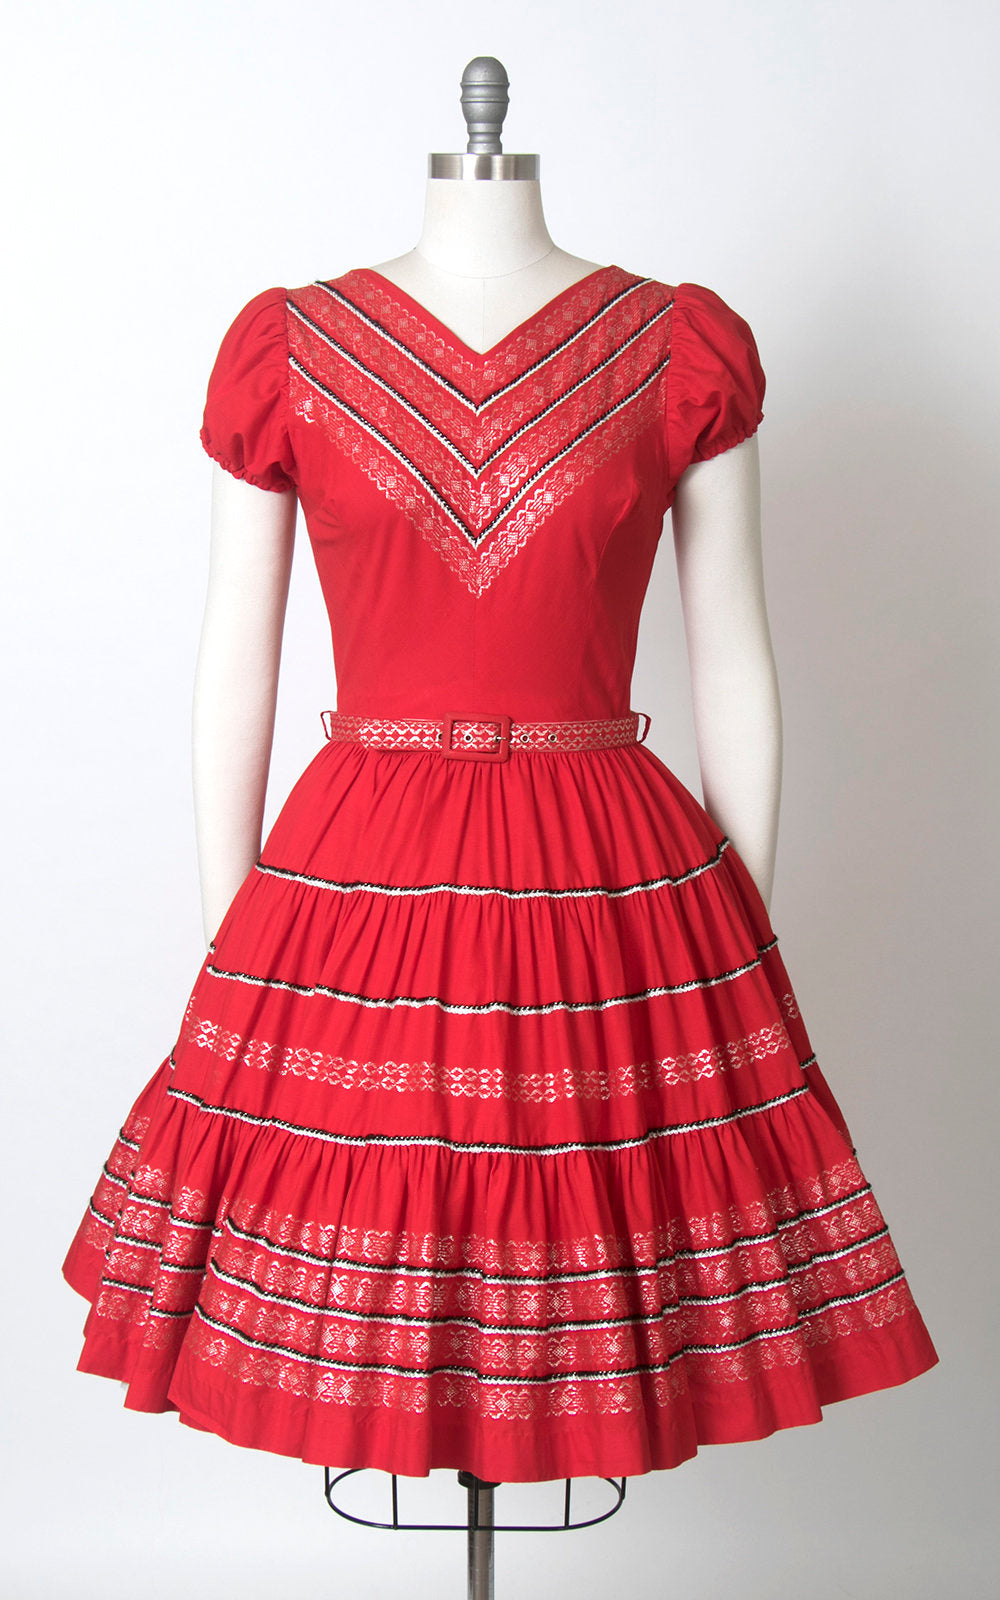 Vintage 1970s Dress | 70s does 1950s Fiesta Patio Dress Red Cotton Southwestern Square Dance Swing Day Dress (small/medium)